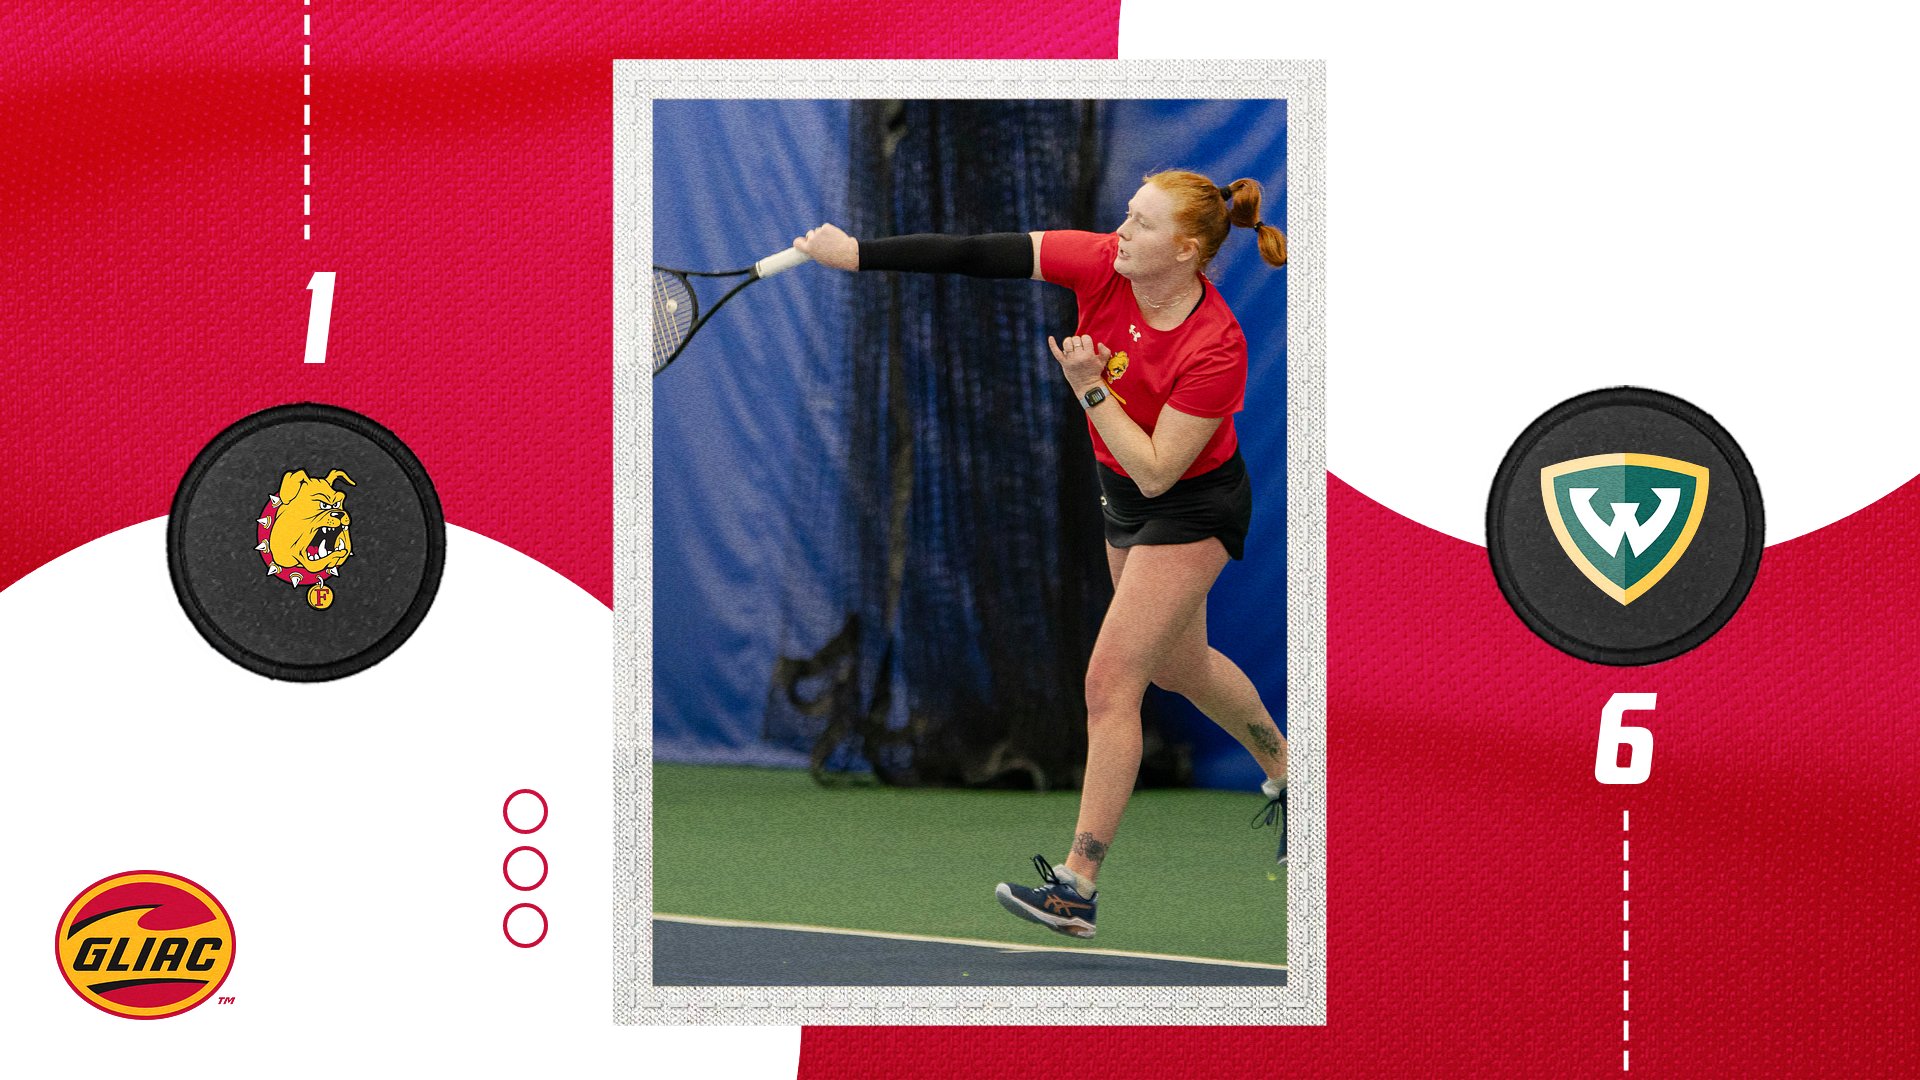 Ferris State Women's Tennis Falls To #23 Wayne State In League First-Place Tilt